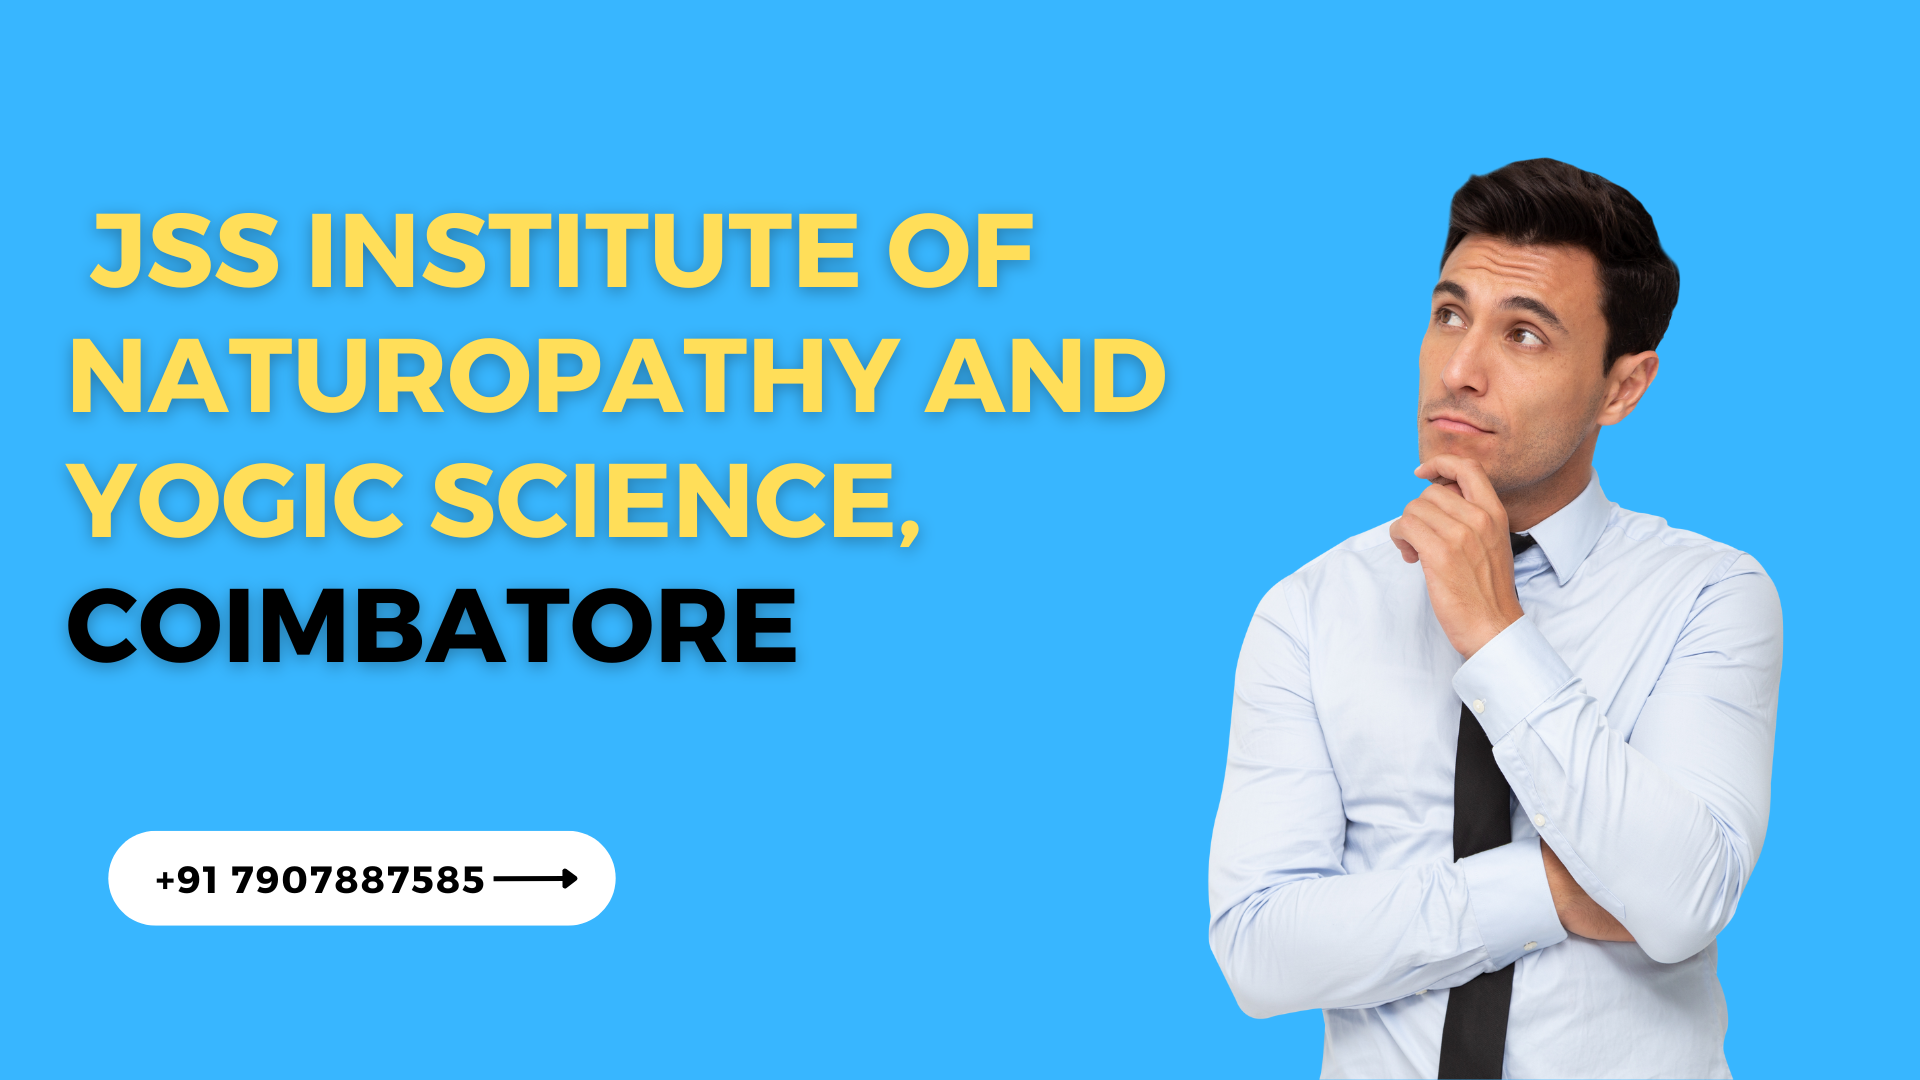 JSS Institute-of-Naturopathy-and-Yogic-Science